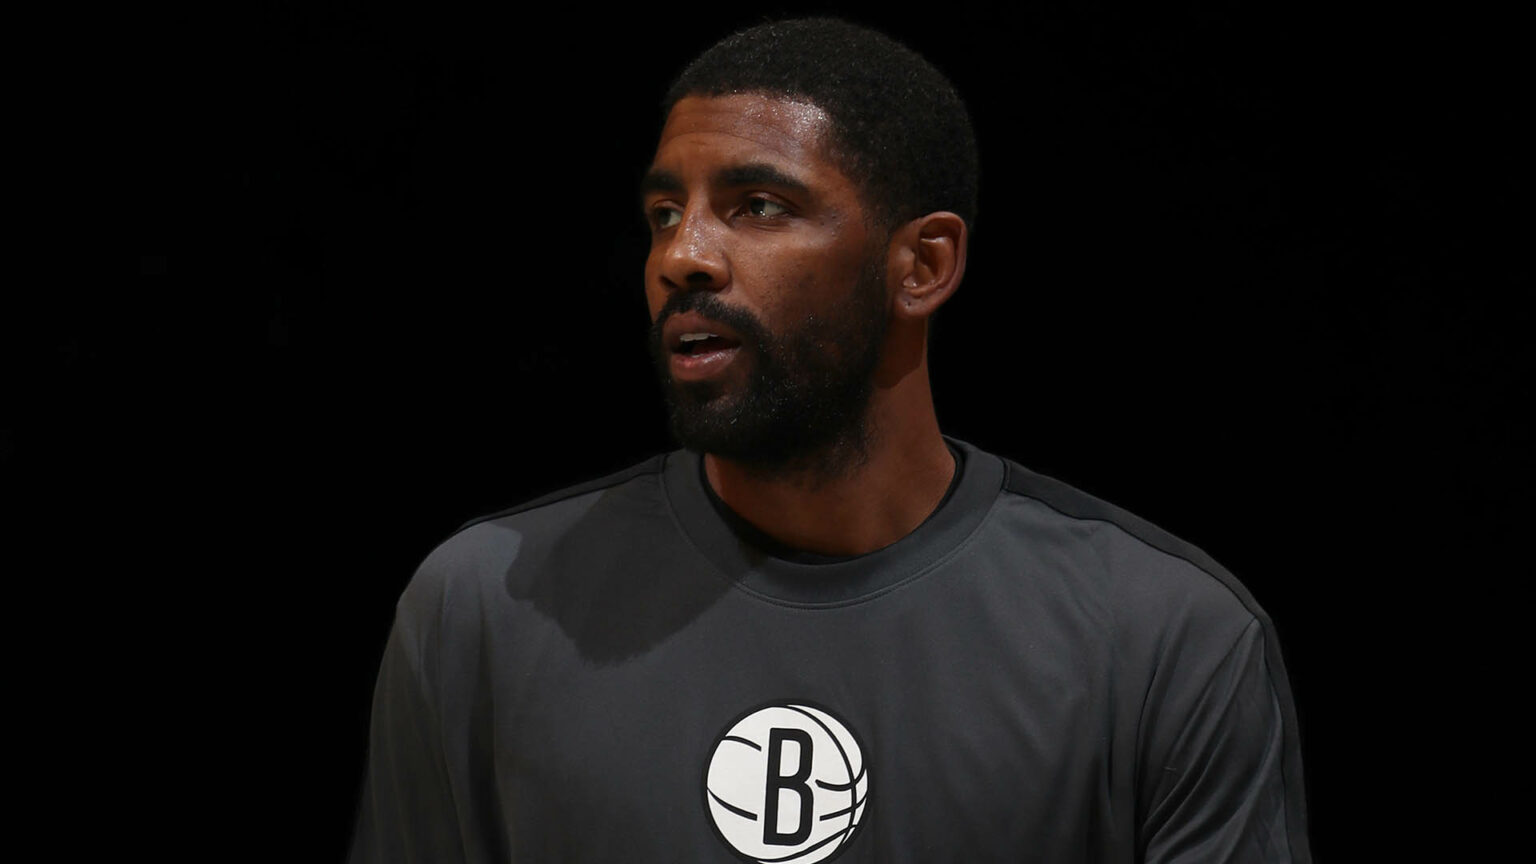 Nets announce Kyrie Irving won't play or practice with team | NBA.com ...